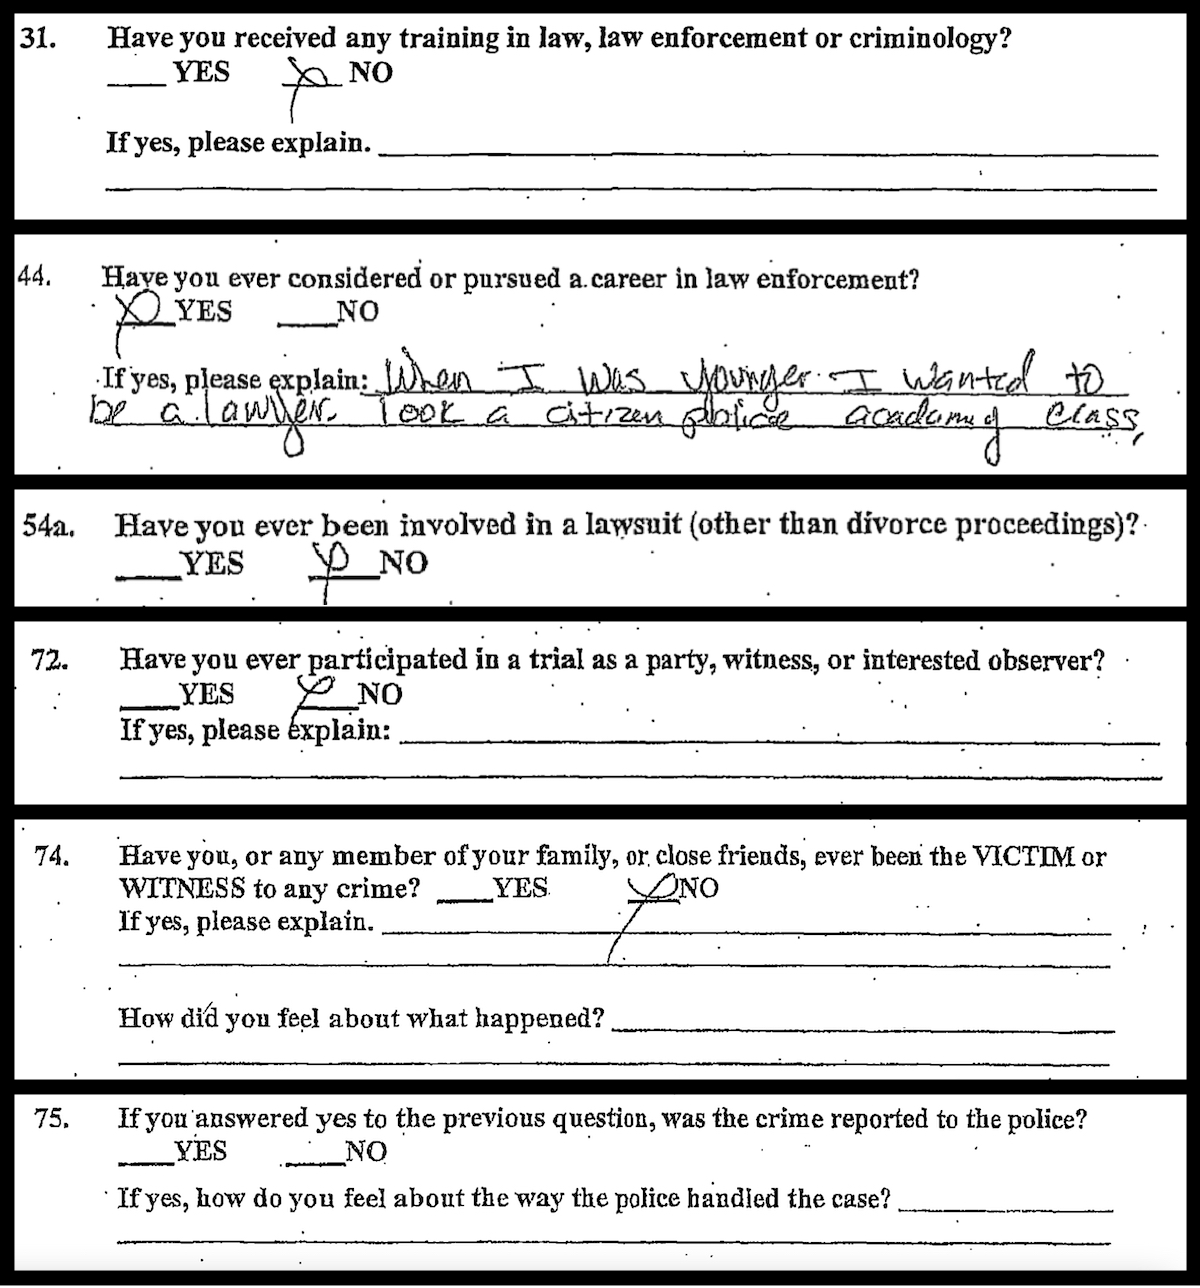 Scott Peterson's defense team says these selections from Richelle Nice's March 9, 2004 juror questionnaire suggest she was trying to hide her past in order to get on the jury. 